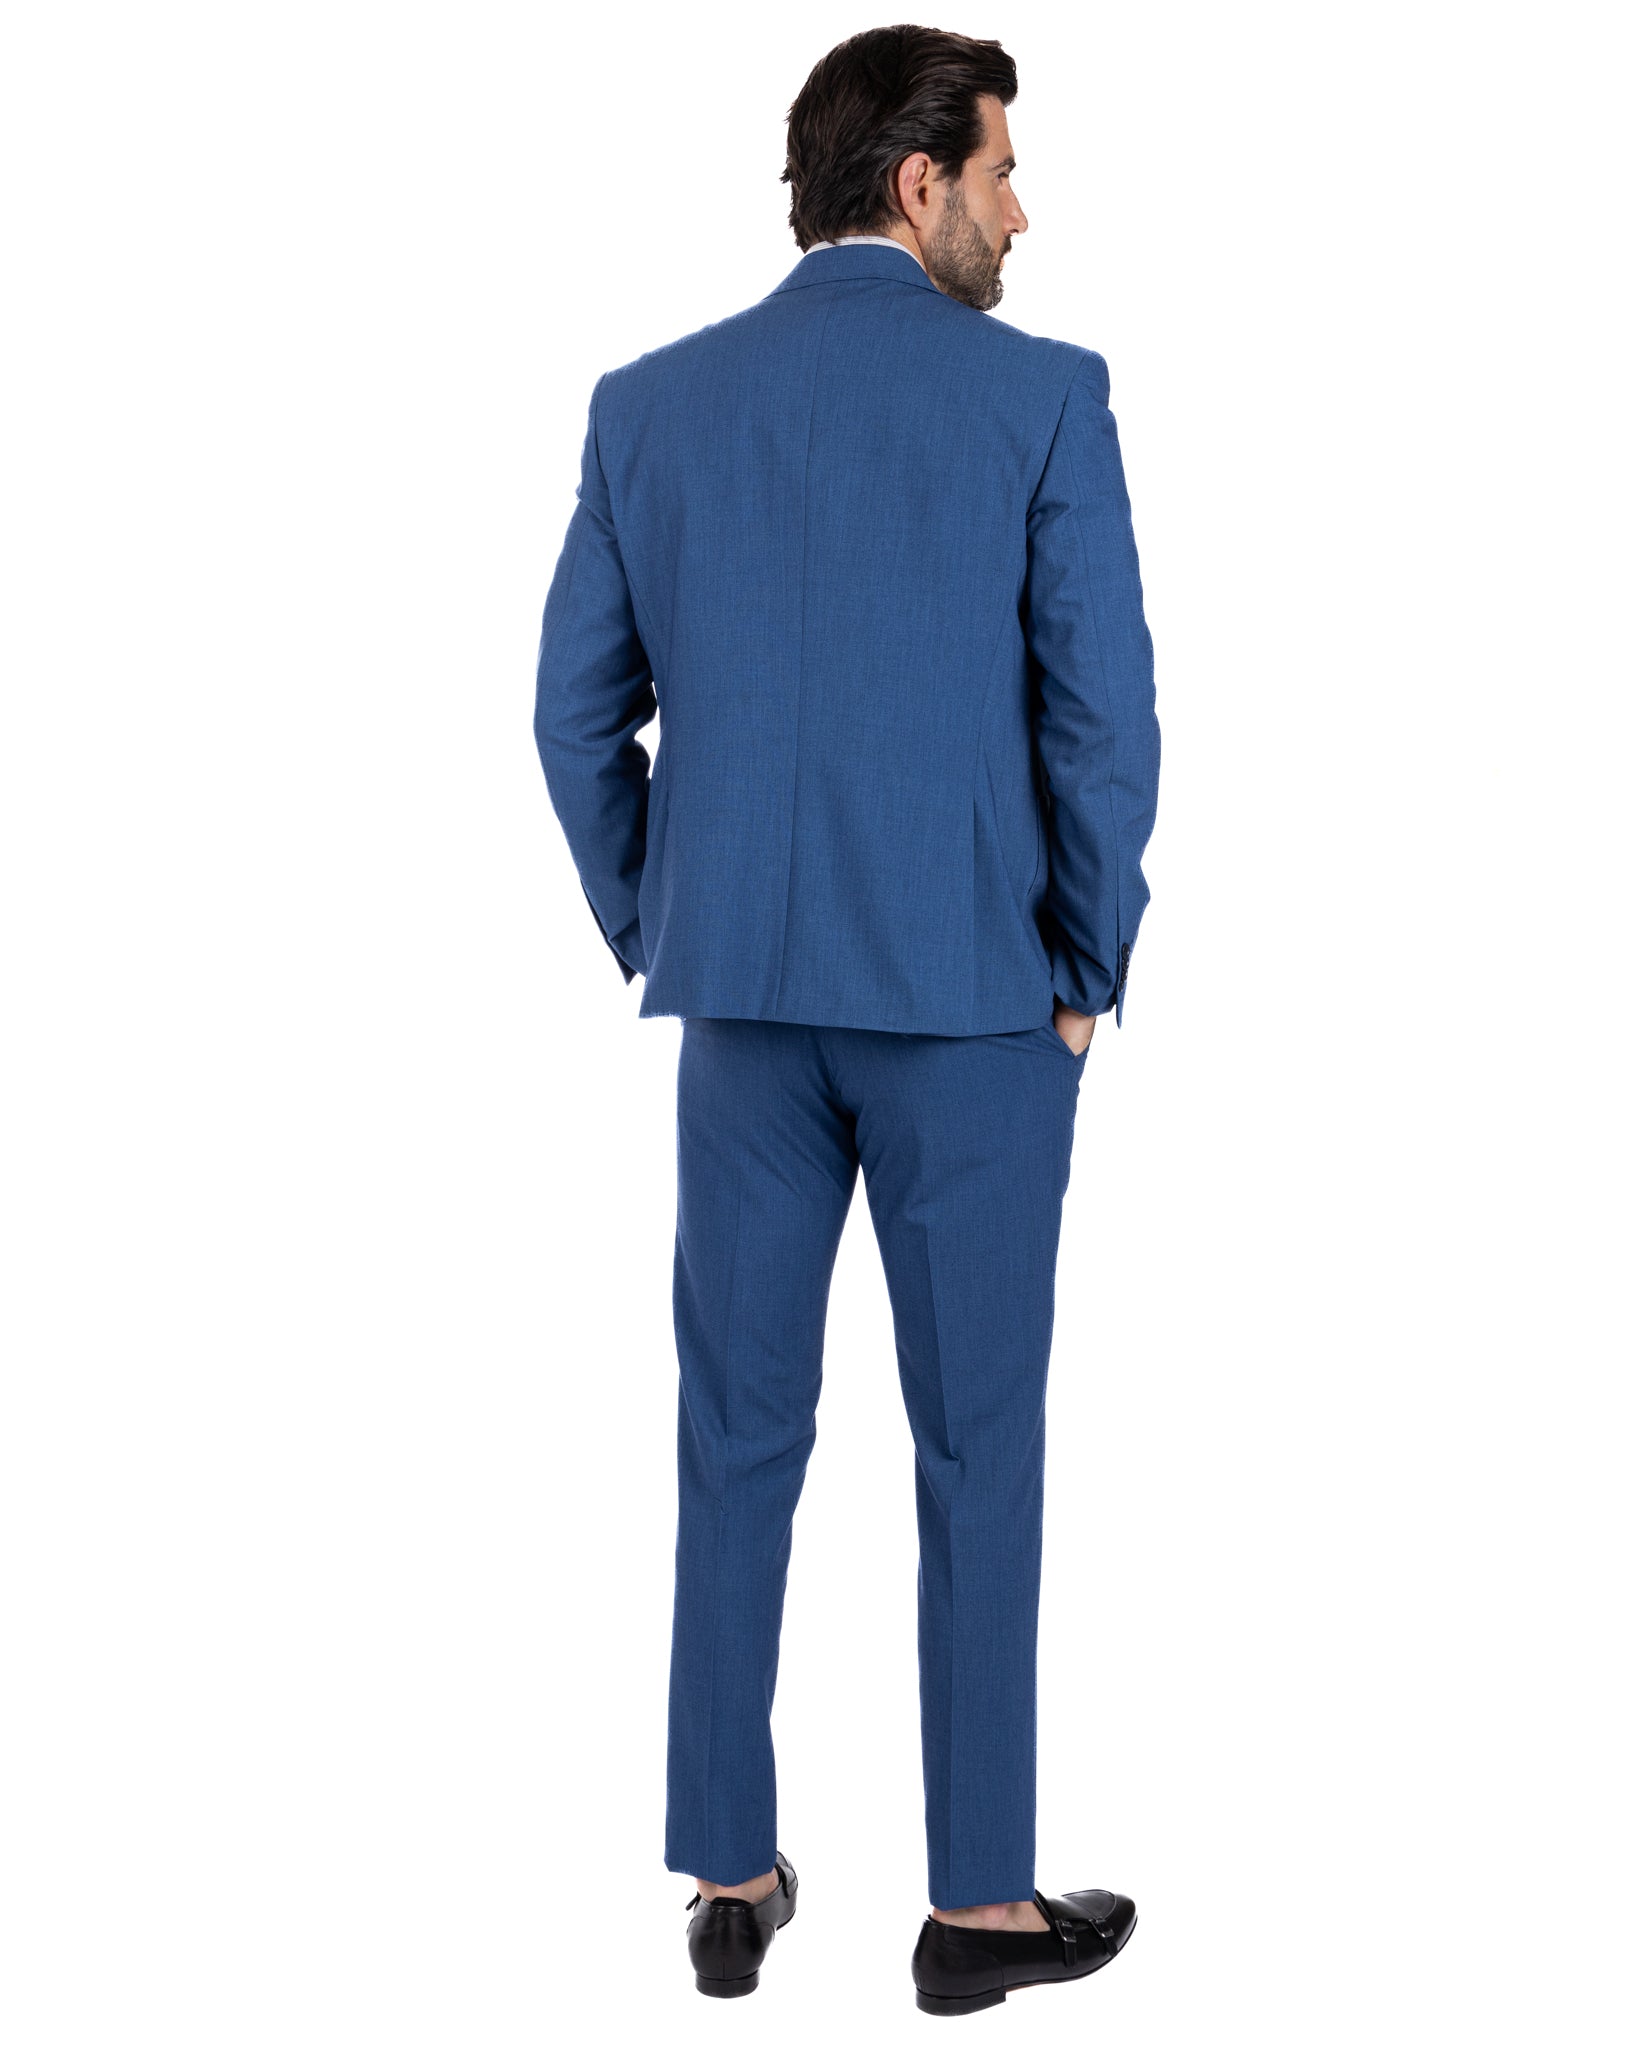 Monaco - double-breasted jeans suit